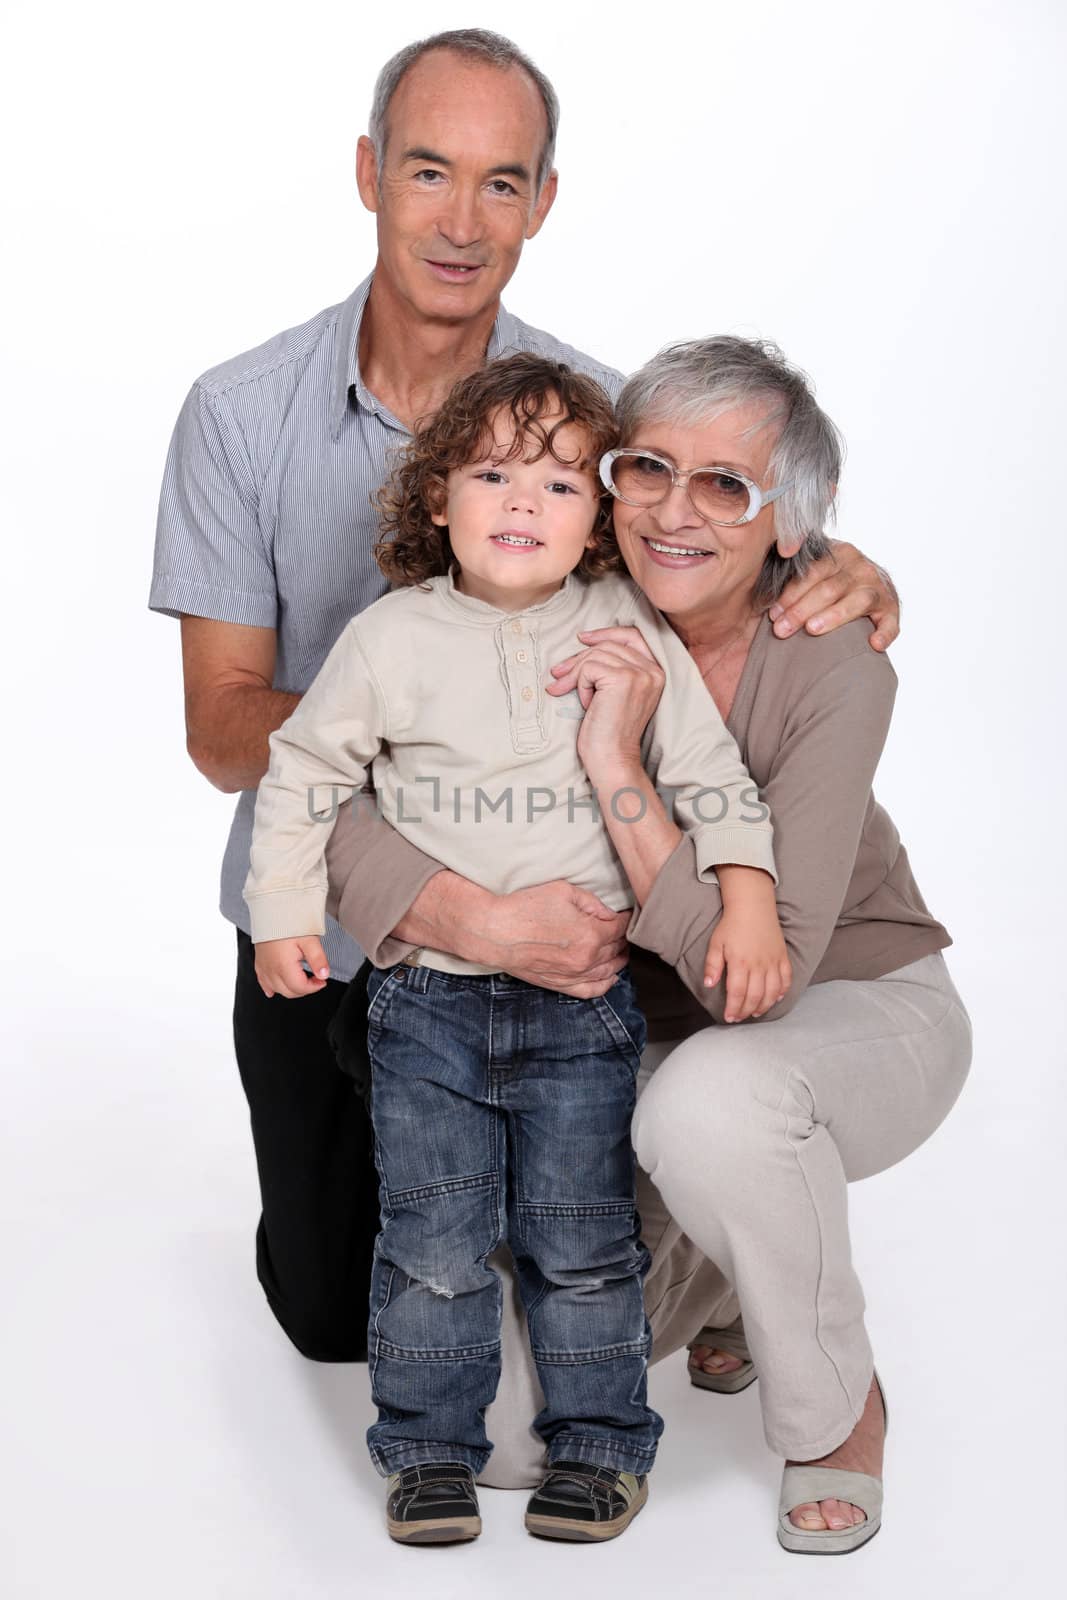 grandparents and their grandson by phovoir